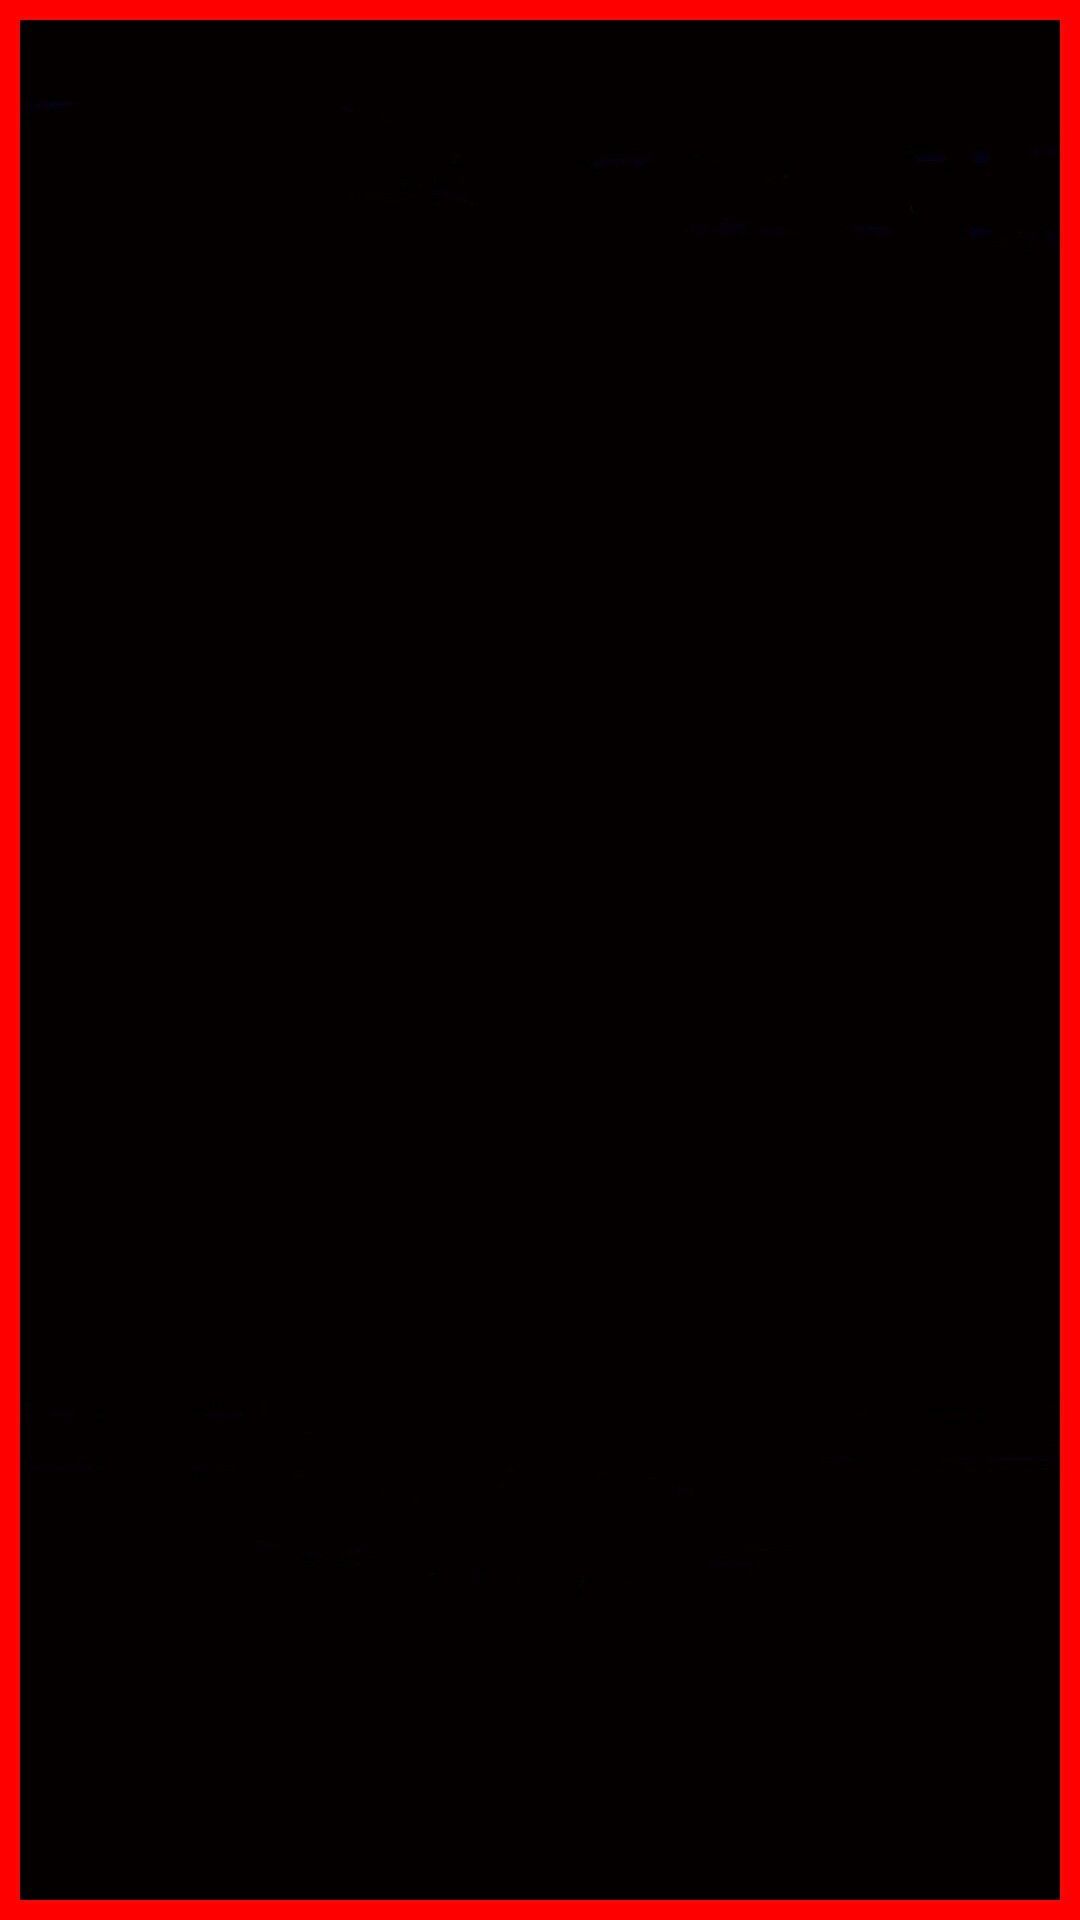 iPhone 7 Red Border Wallpaper